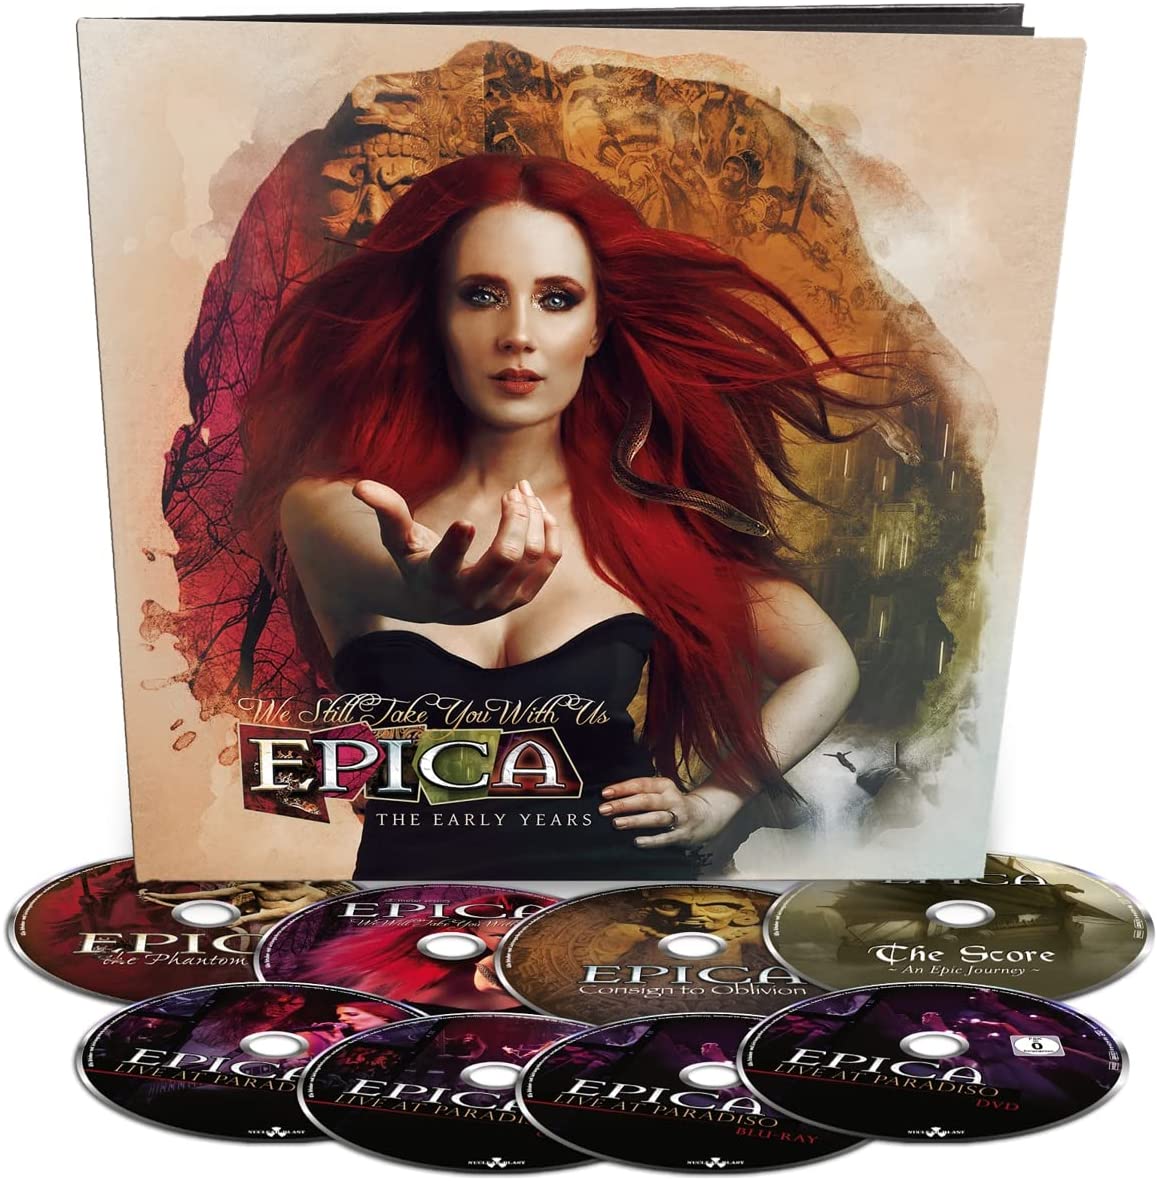 Epica "We Still Take You With Us" Limited 6 CD / DVD Earbook